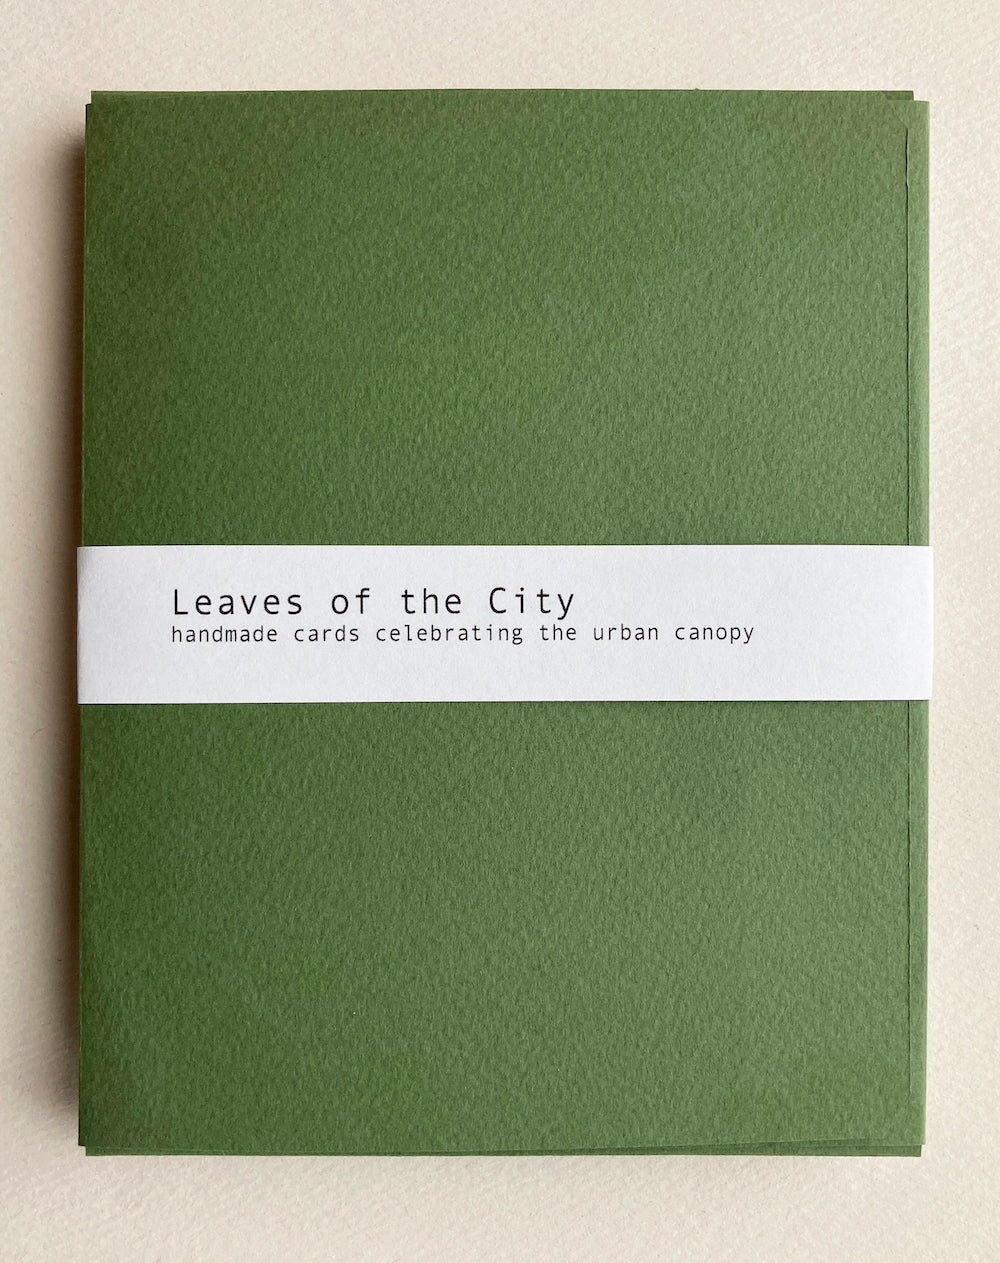 Leaves of the City